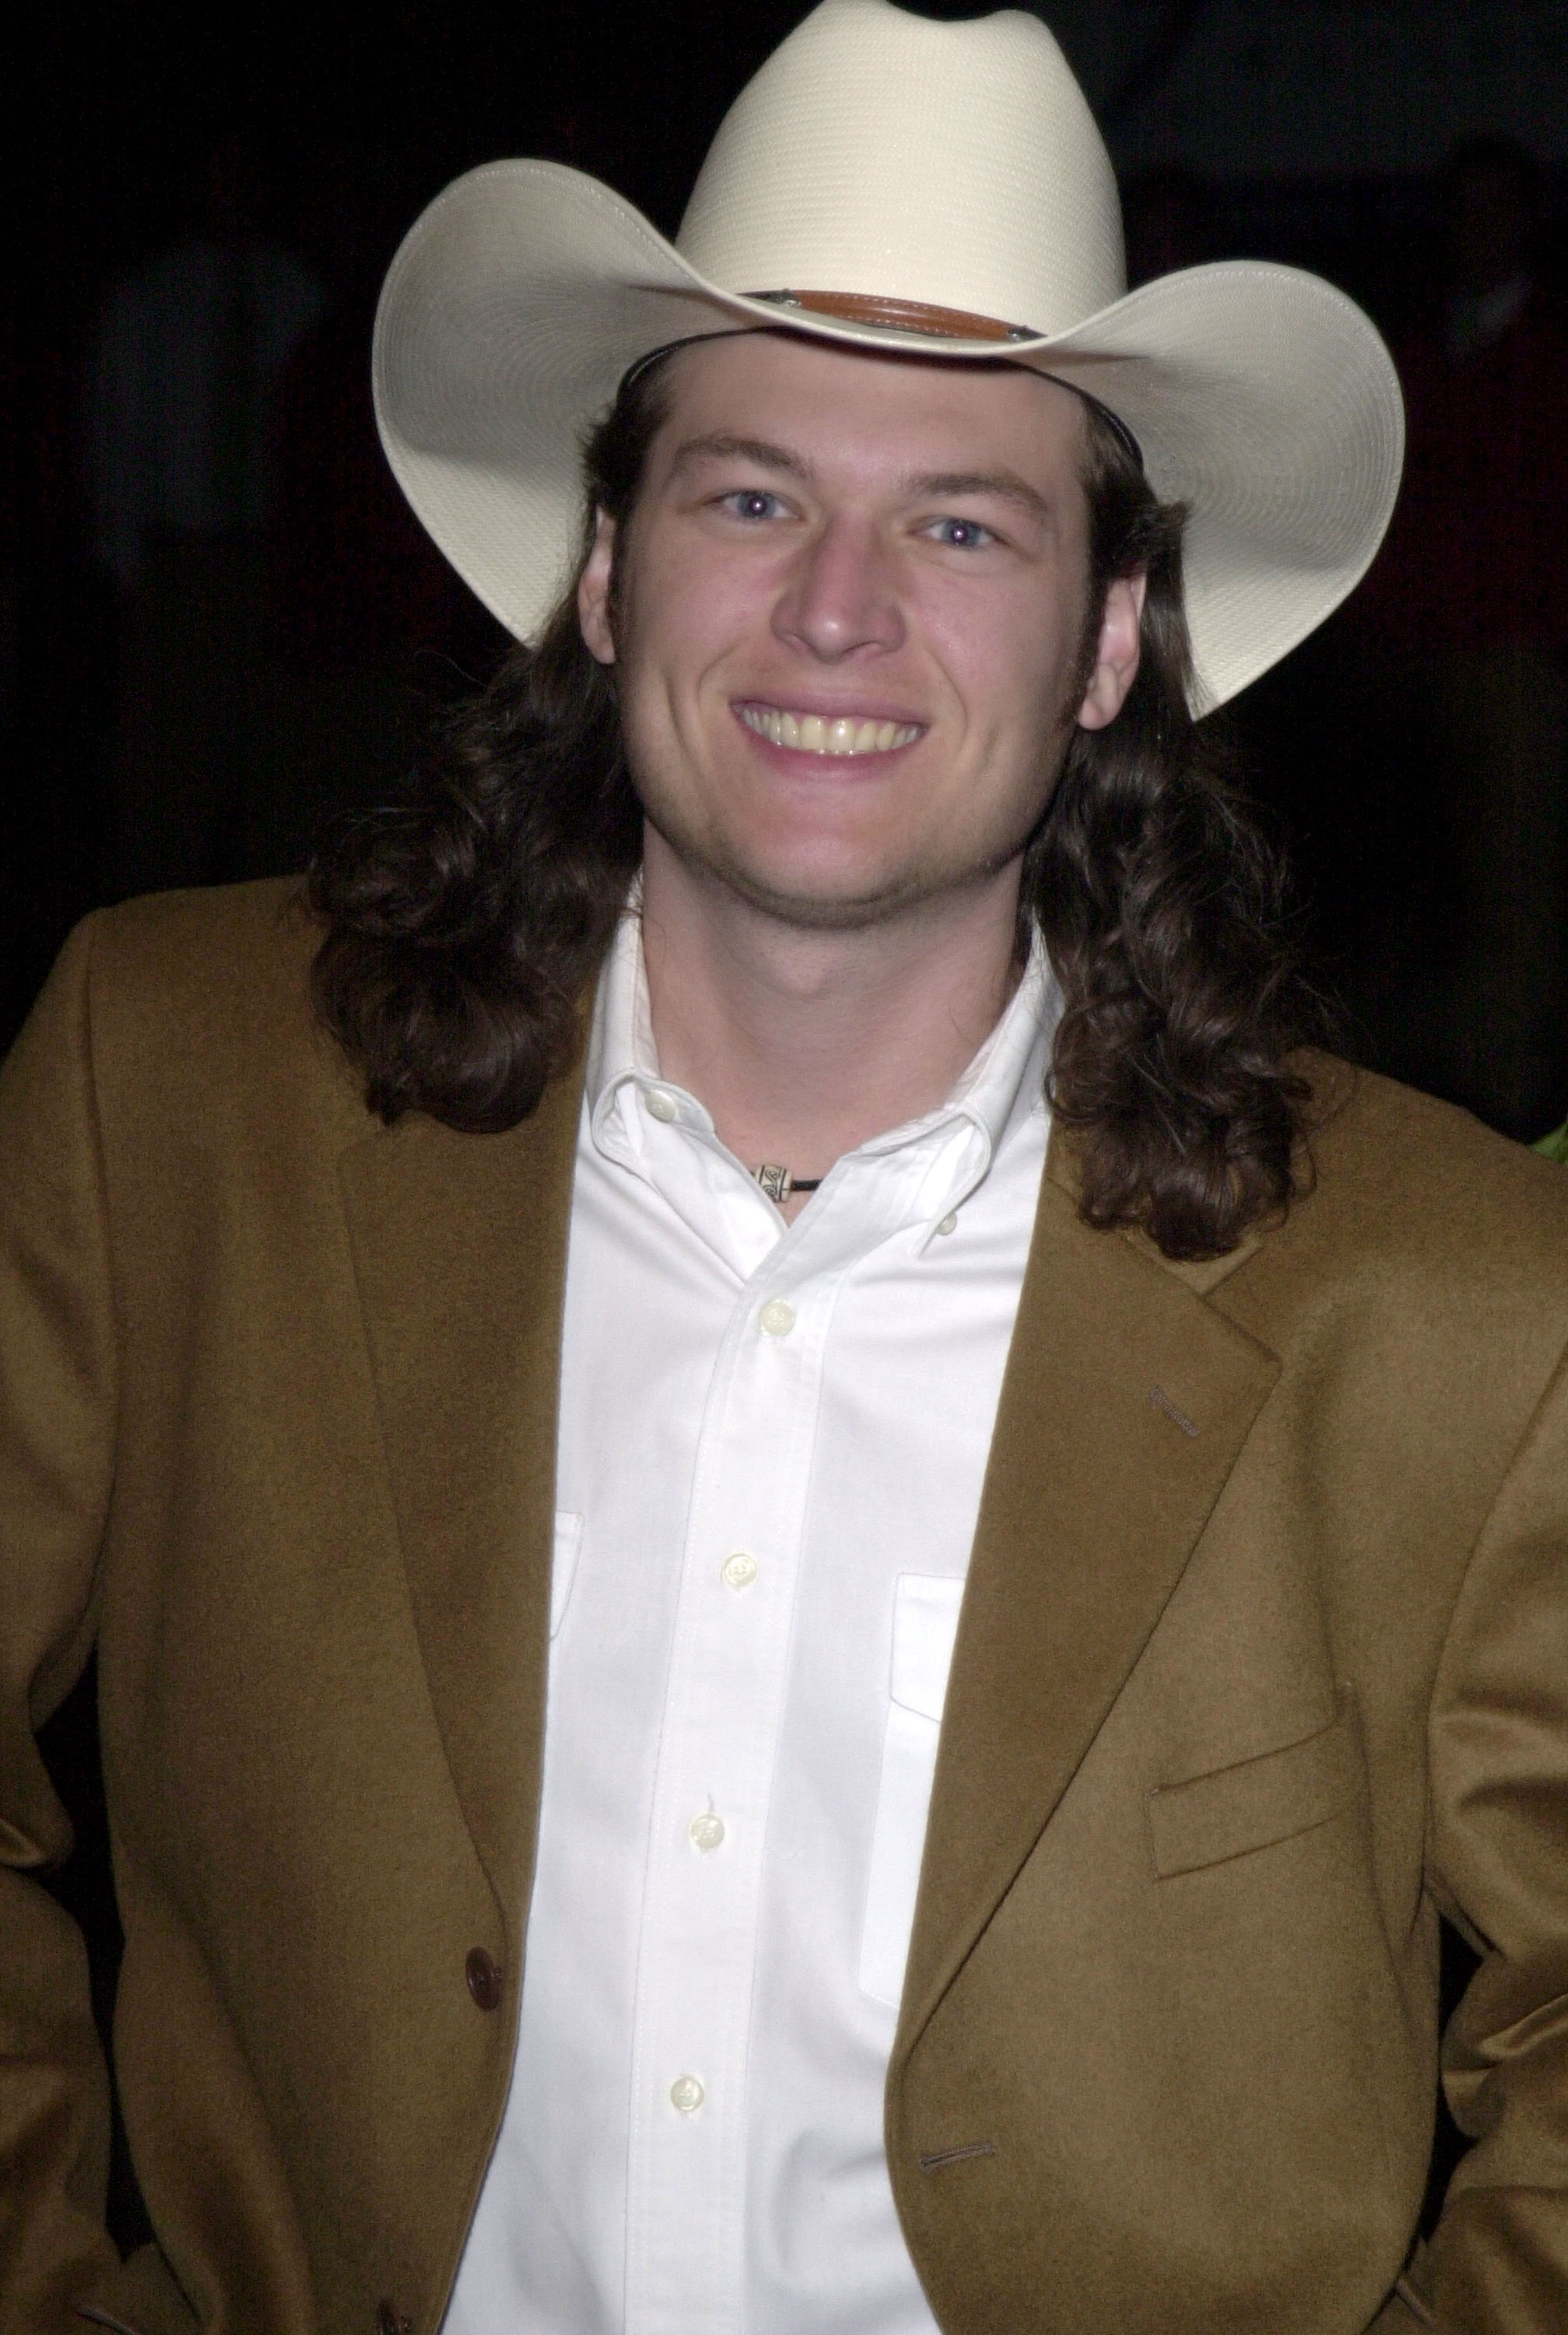 Blake Shelton at the BMI Nashville Headquarters in Nashville, Tennessee on November 6, 2001 | Source: Getty Images